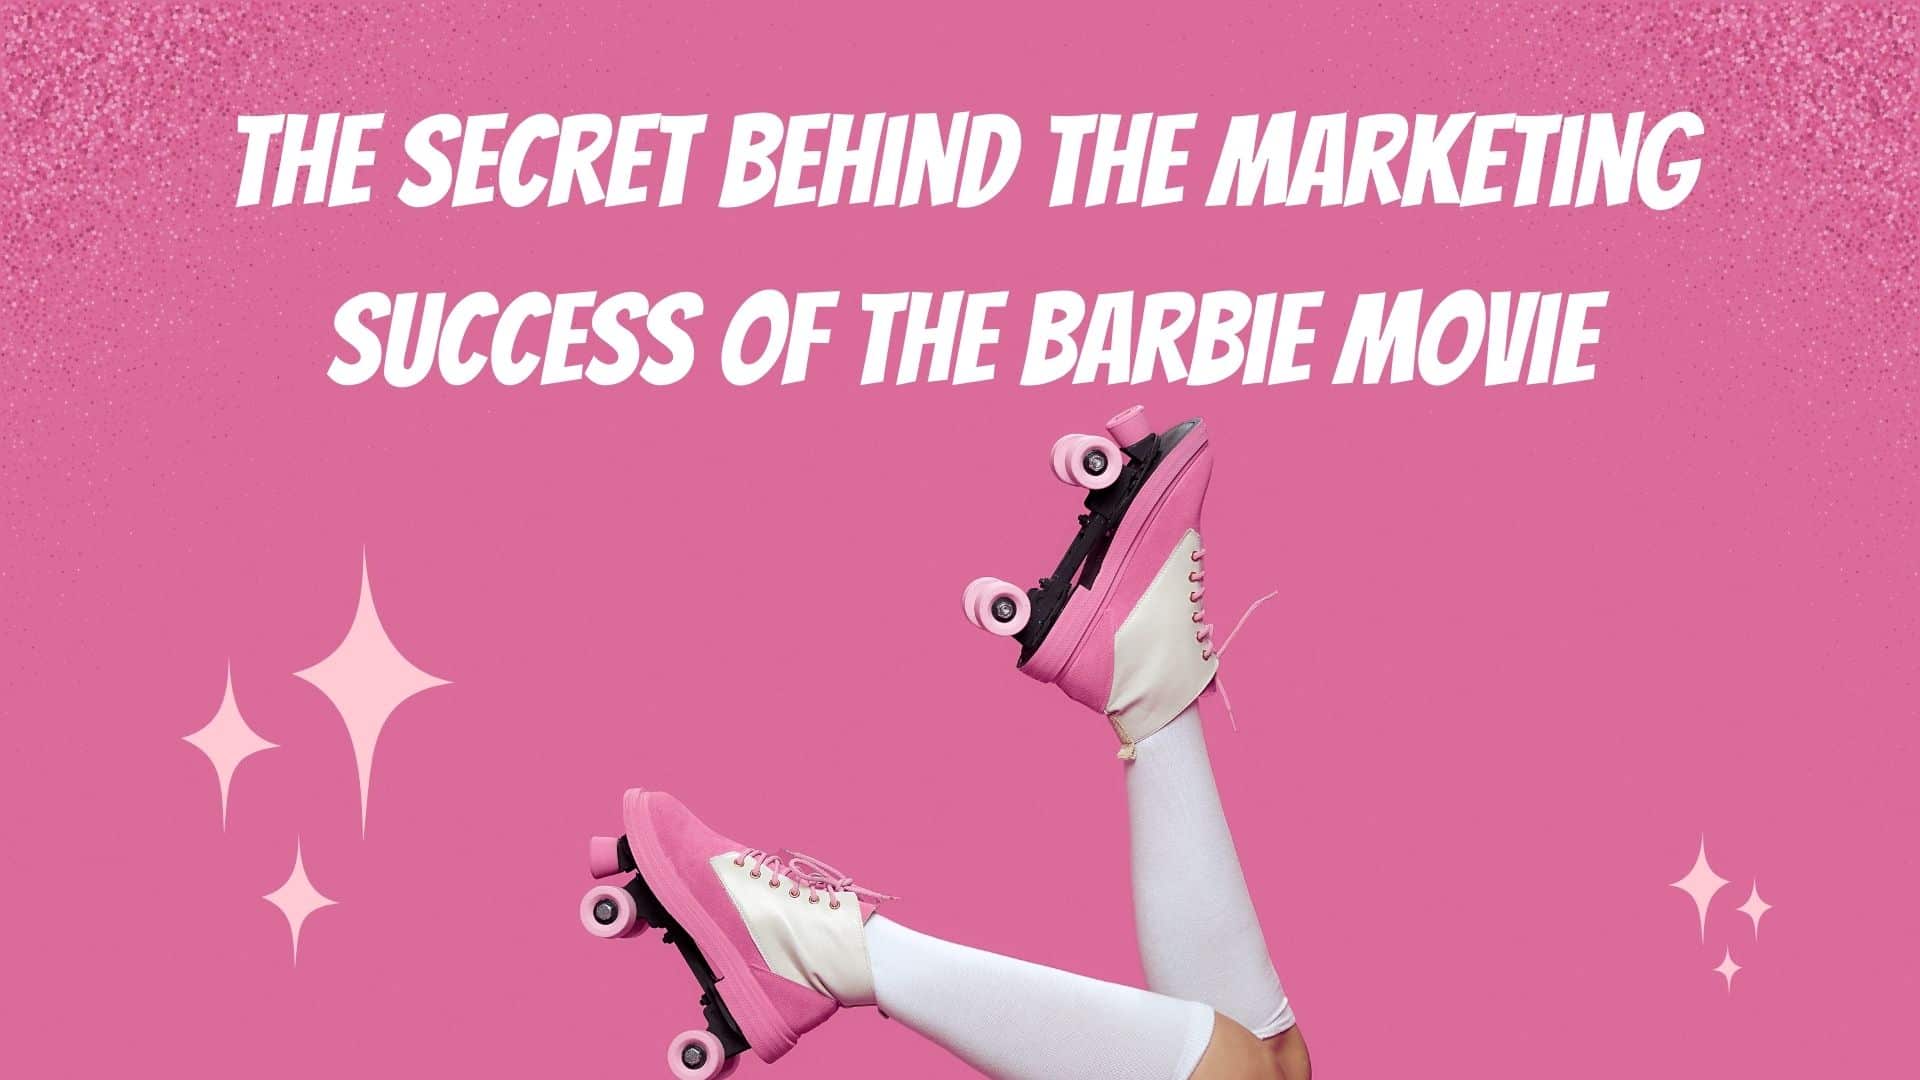 The Secret Behind the Marketing Success Of the Barbie Movie